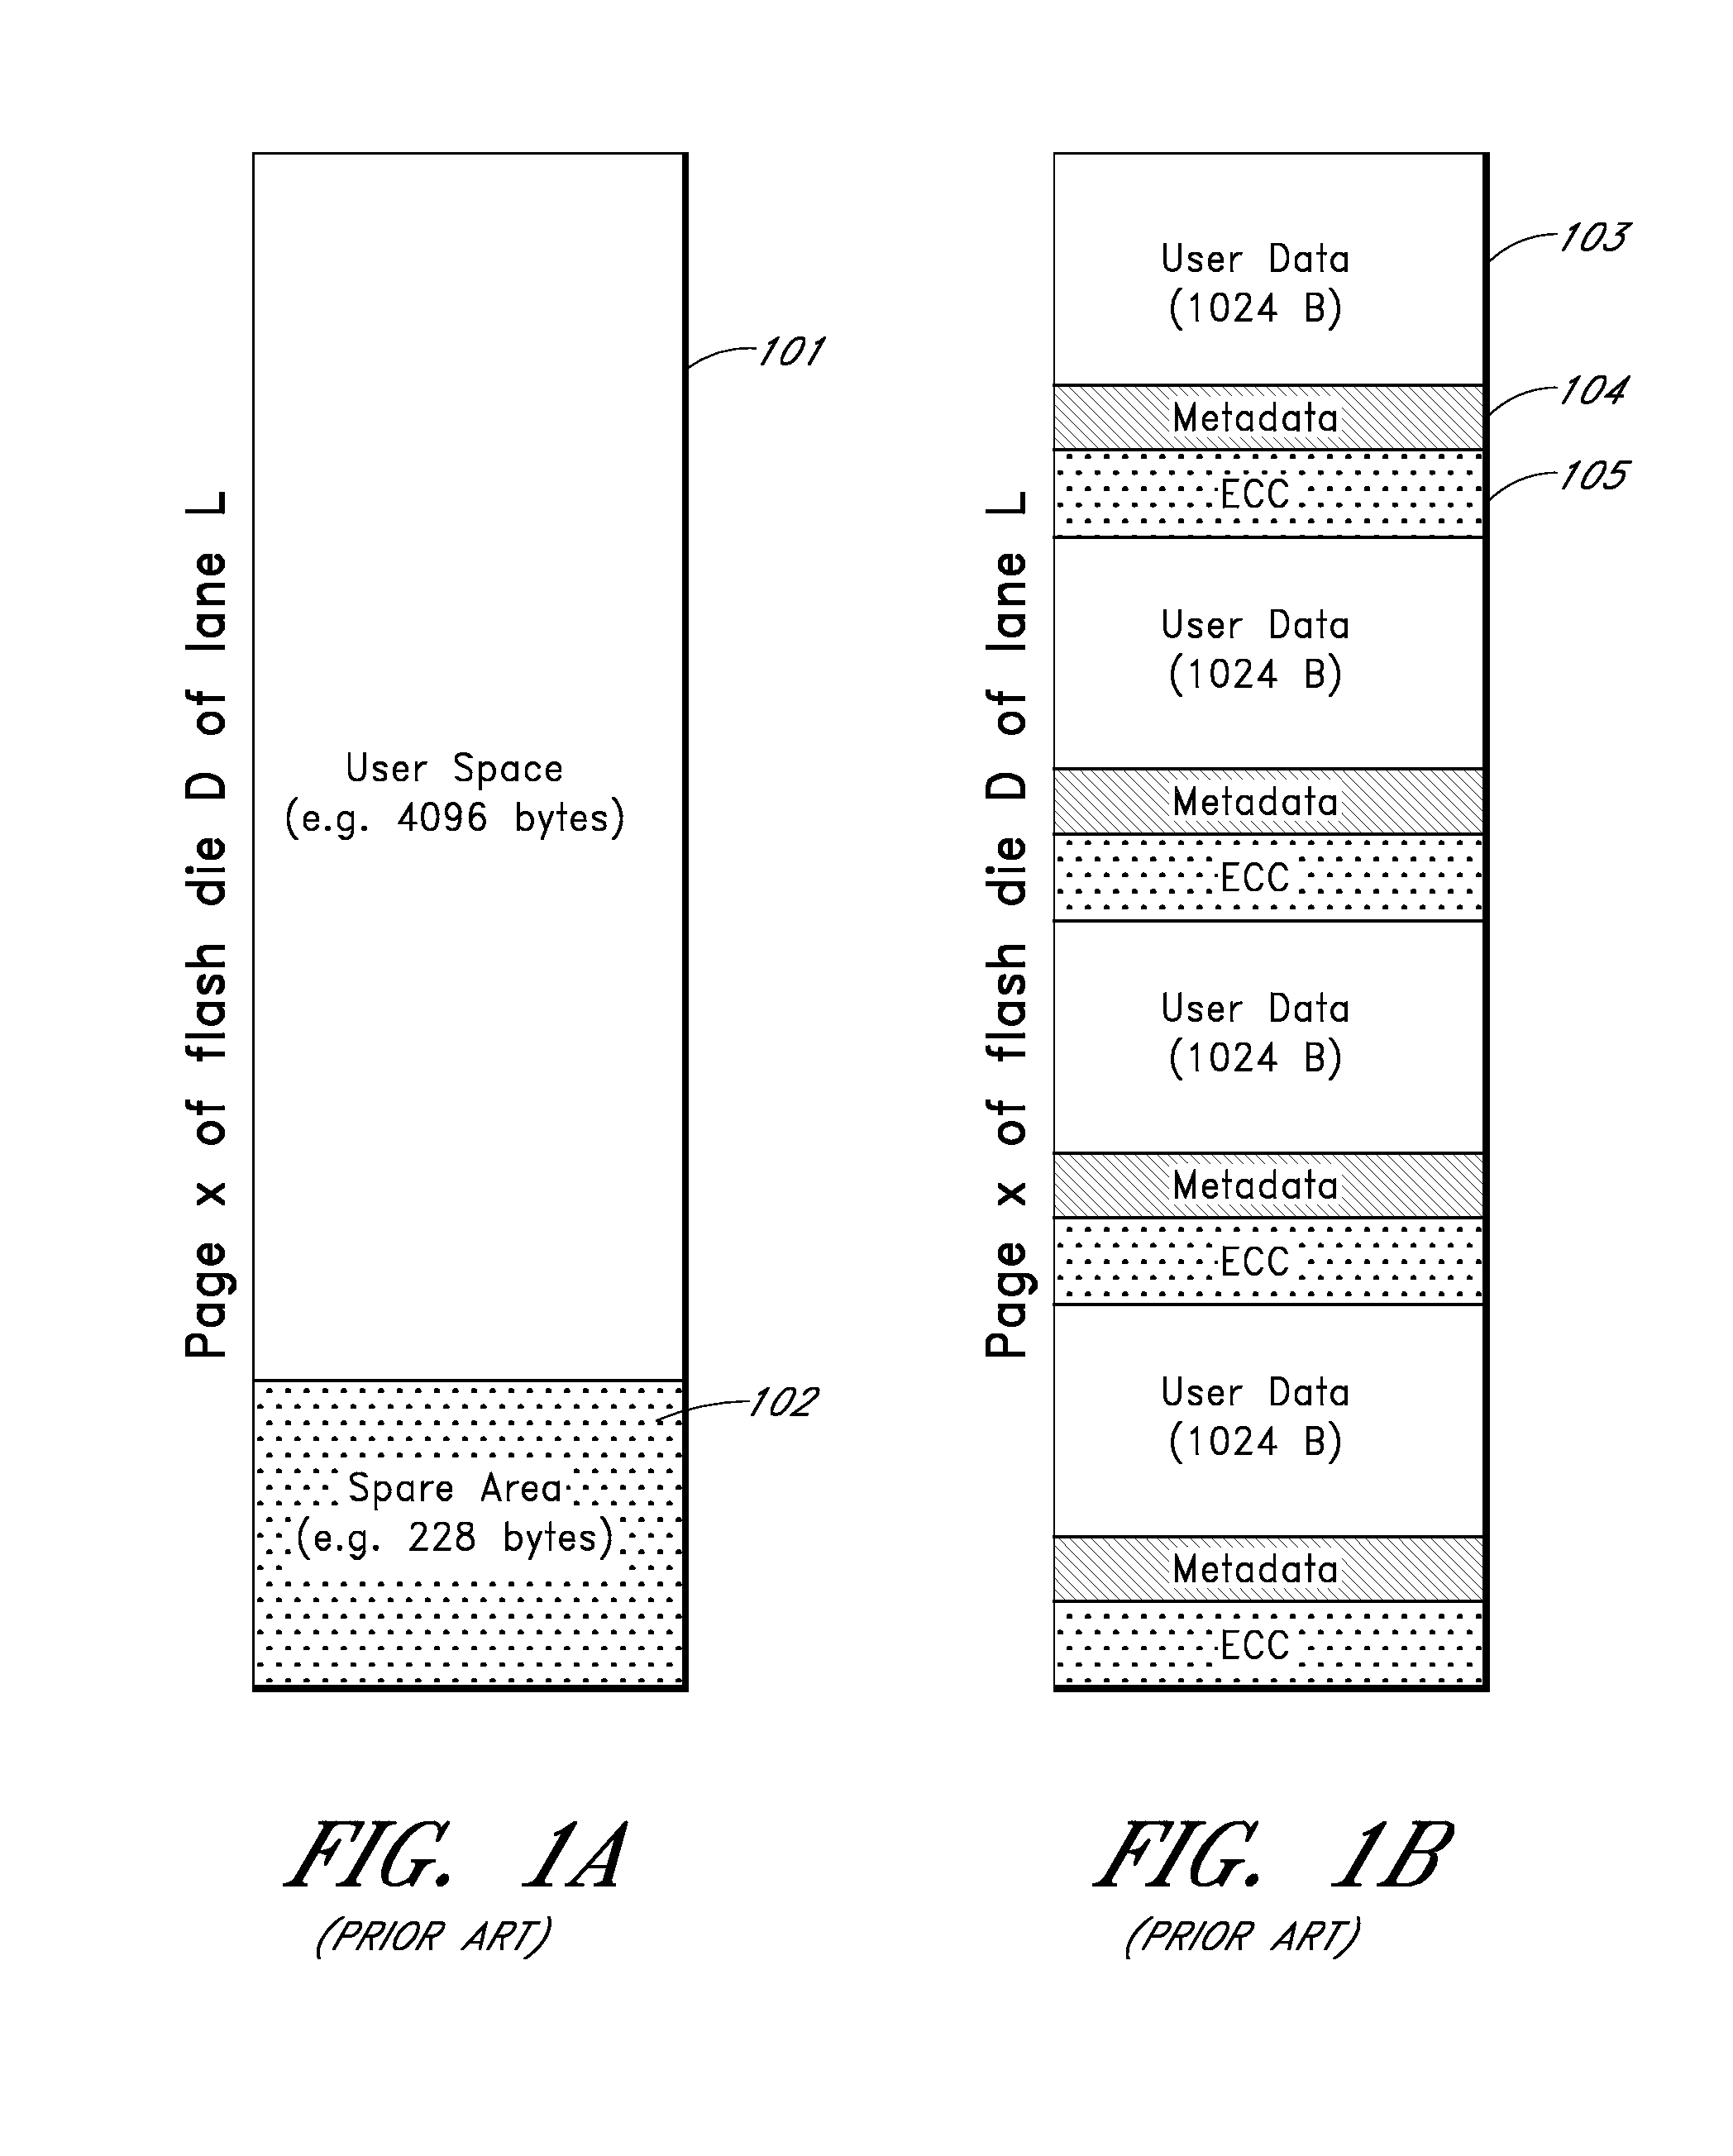 Systems and methods for adaptively selecting from among a plurality of error correction coding schemes in a flash drive for robustness and low latency